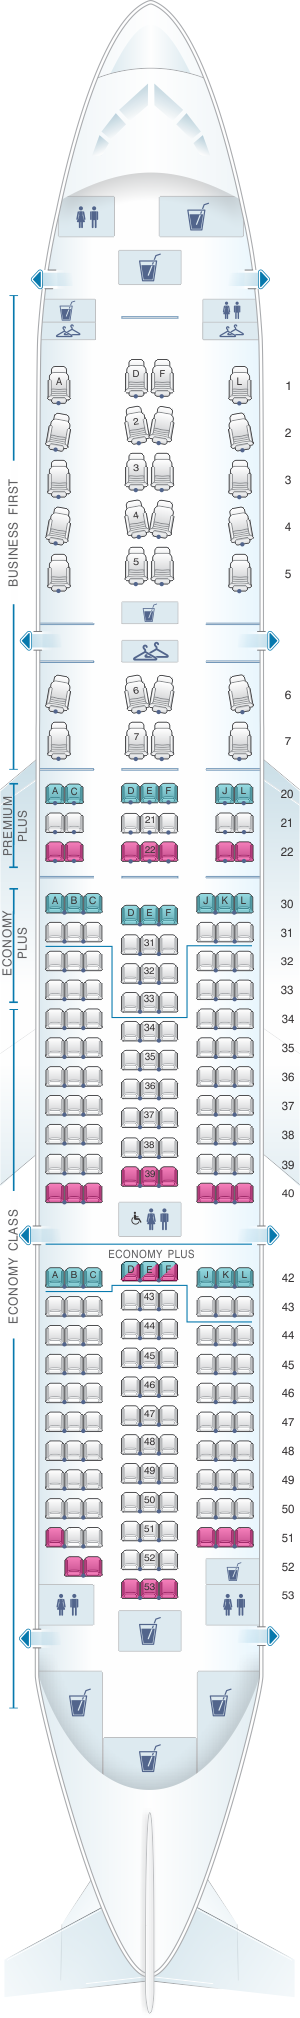 Seat map for United Airlines Boeing B787-8 Dreamliner version 2